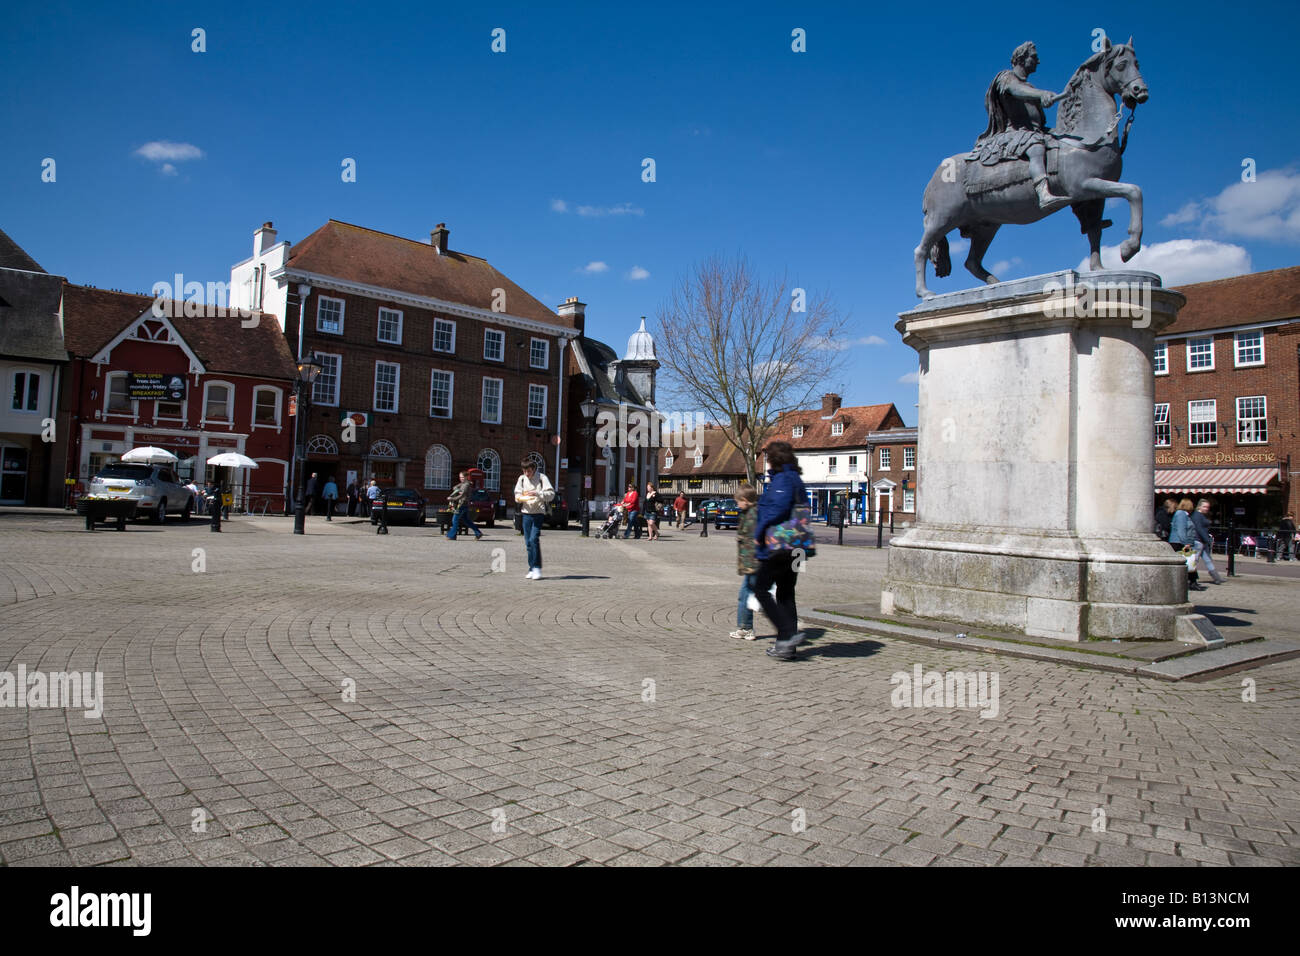 Eighteenth century equestrian statue of King William III in The Square, Petersfield, Hampshire, England. Stock Photo